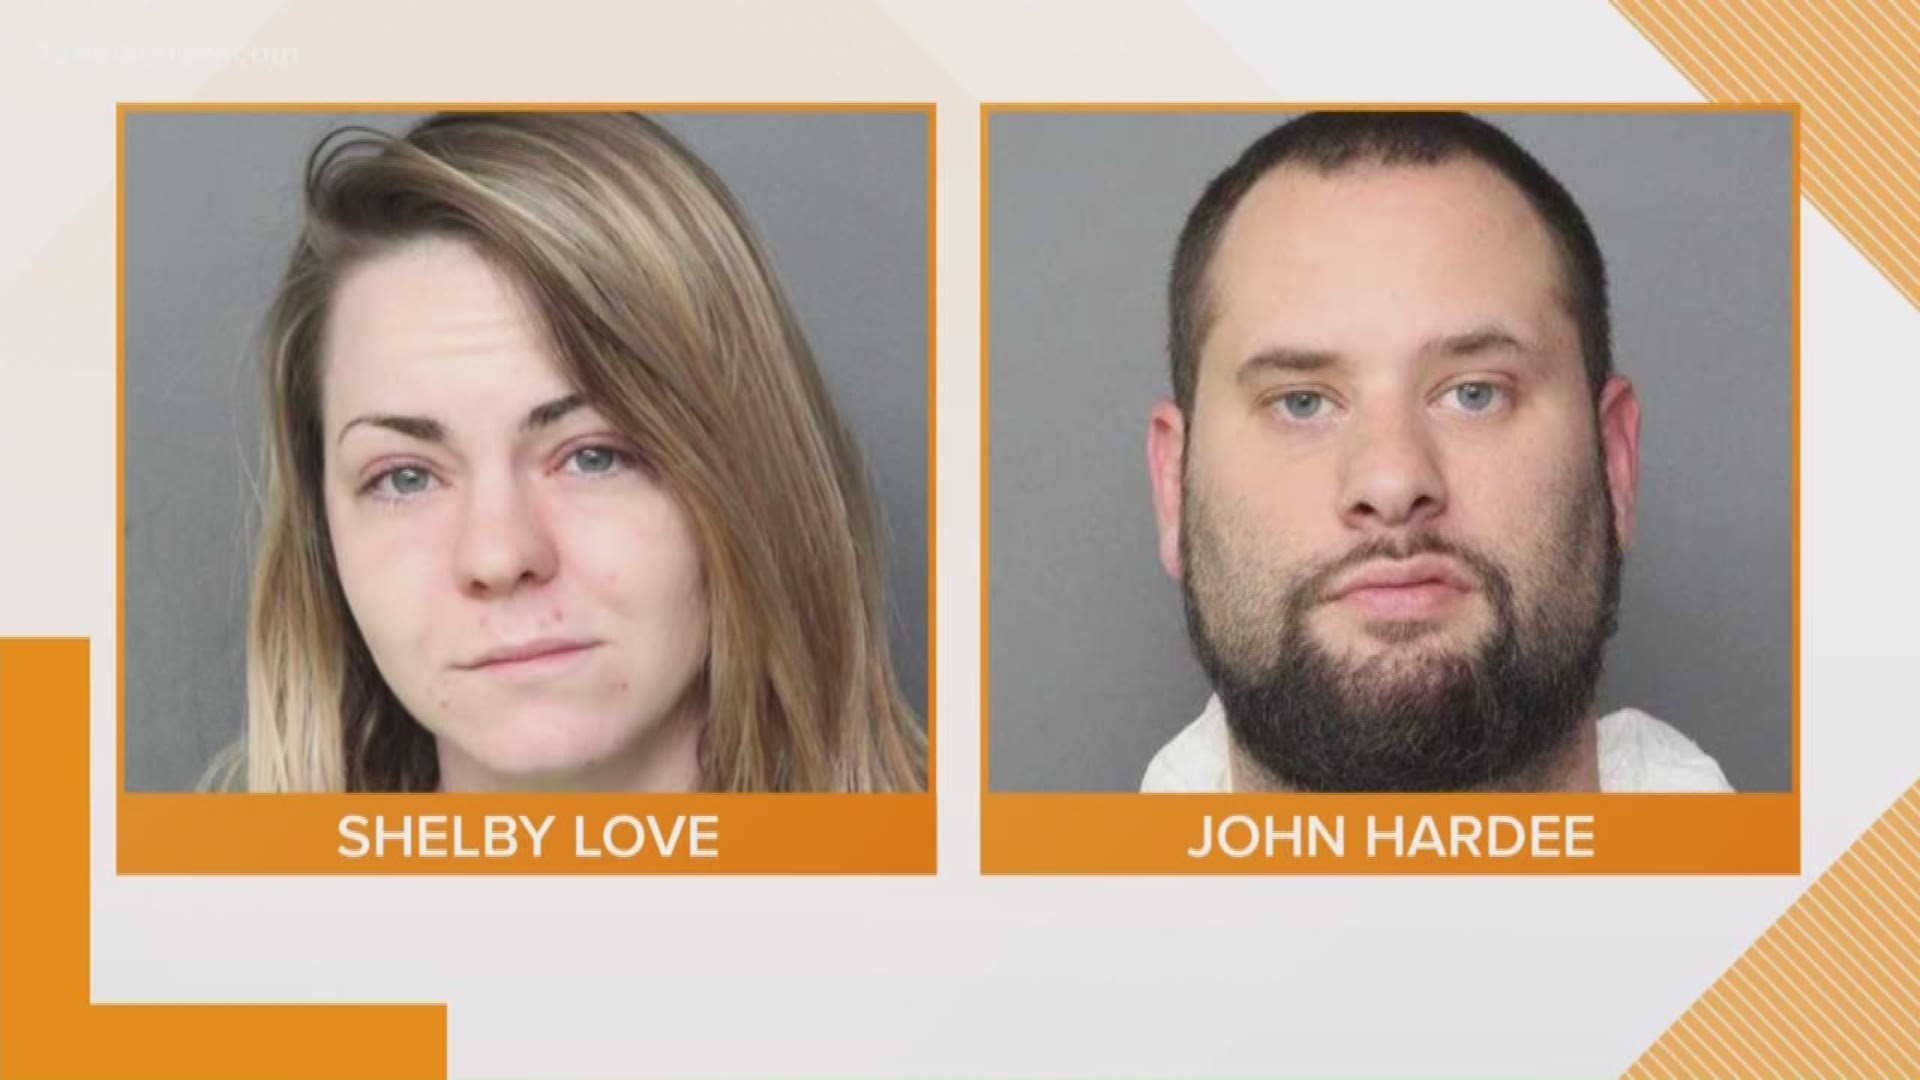 The mother of the 2-year-old, and her boyfriend have been arrested after the toddler died at a Norfolk apartment complex Tuesday.